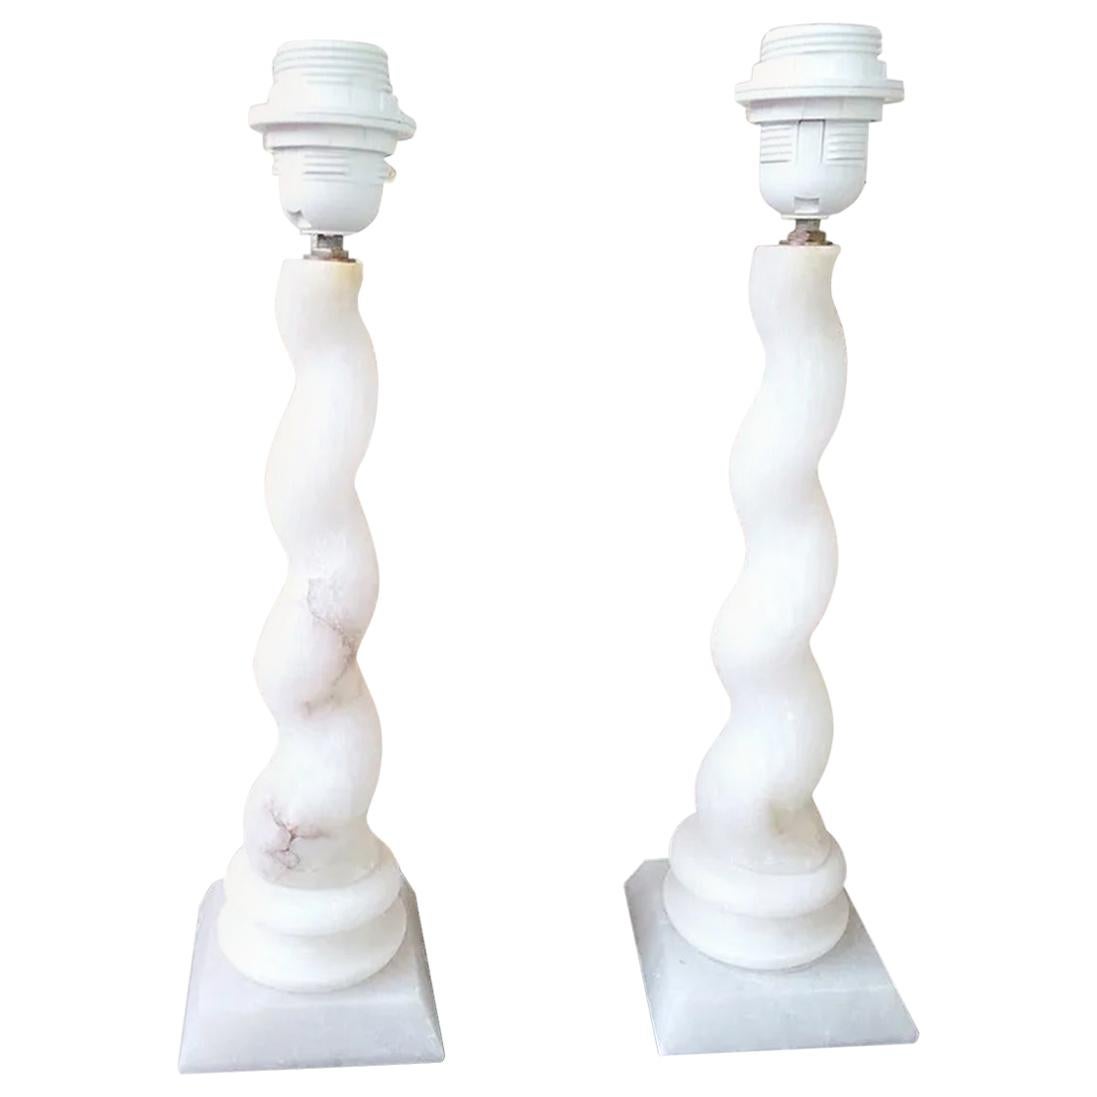 Table lamp in white alabaster Barley twist column-form

It is suitable to put on a side table in the living room or on a bedside table

It is in very good condition

These beautiful Grand Tour style columns are made of marble or white